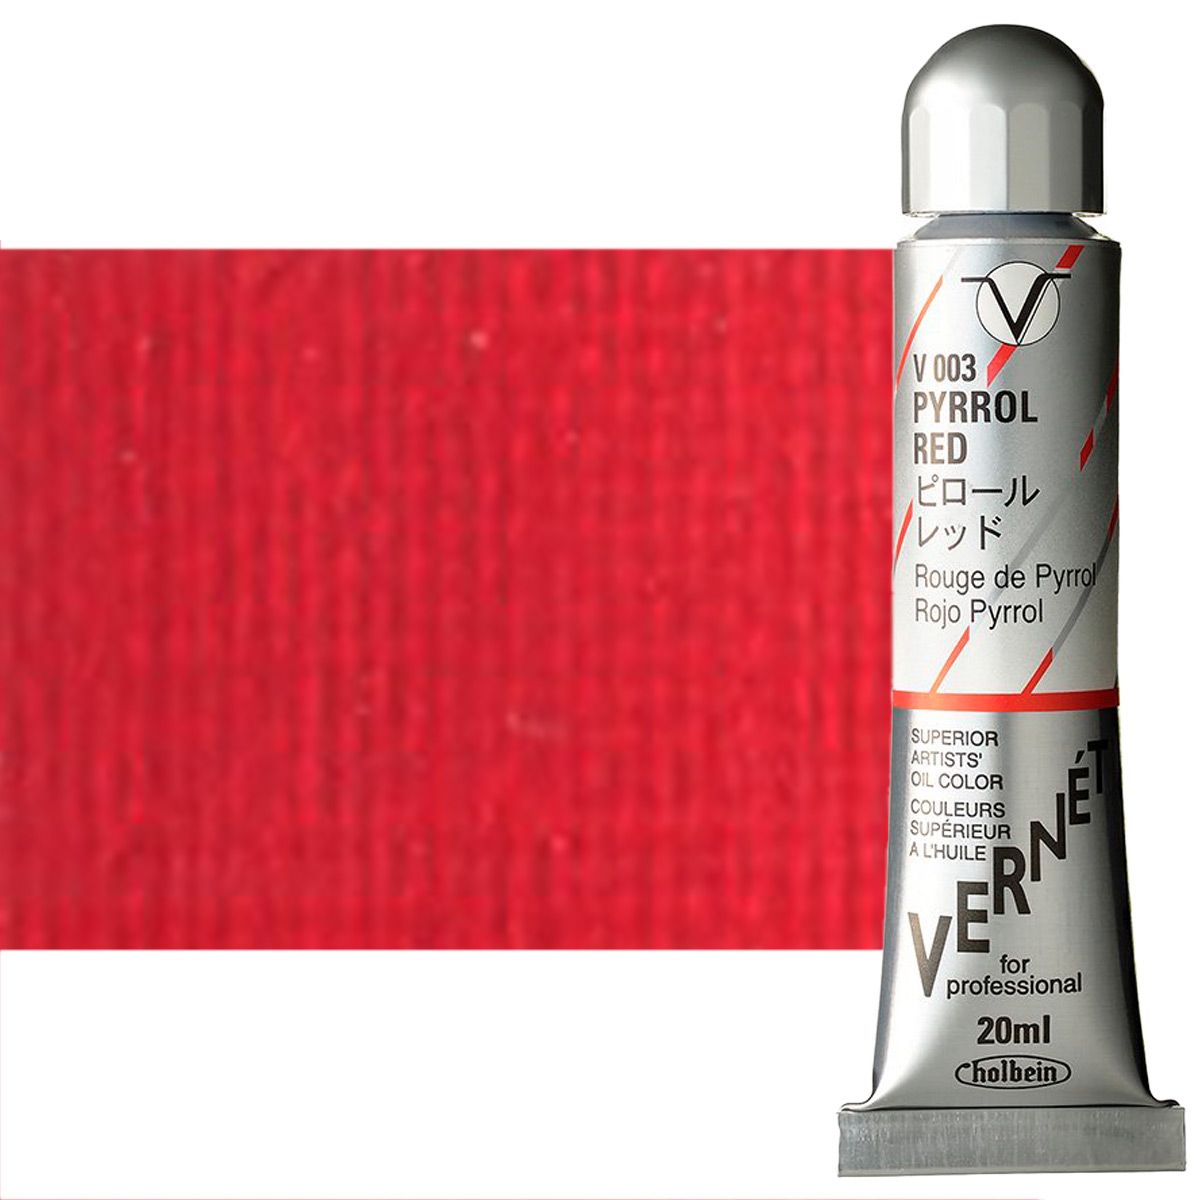 Holbein Vern?t Oil Color 20 ml Tube - Pyrrol Red